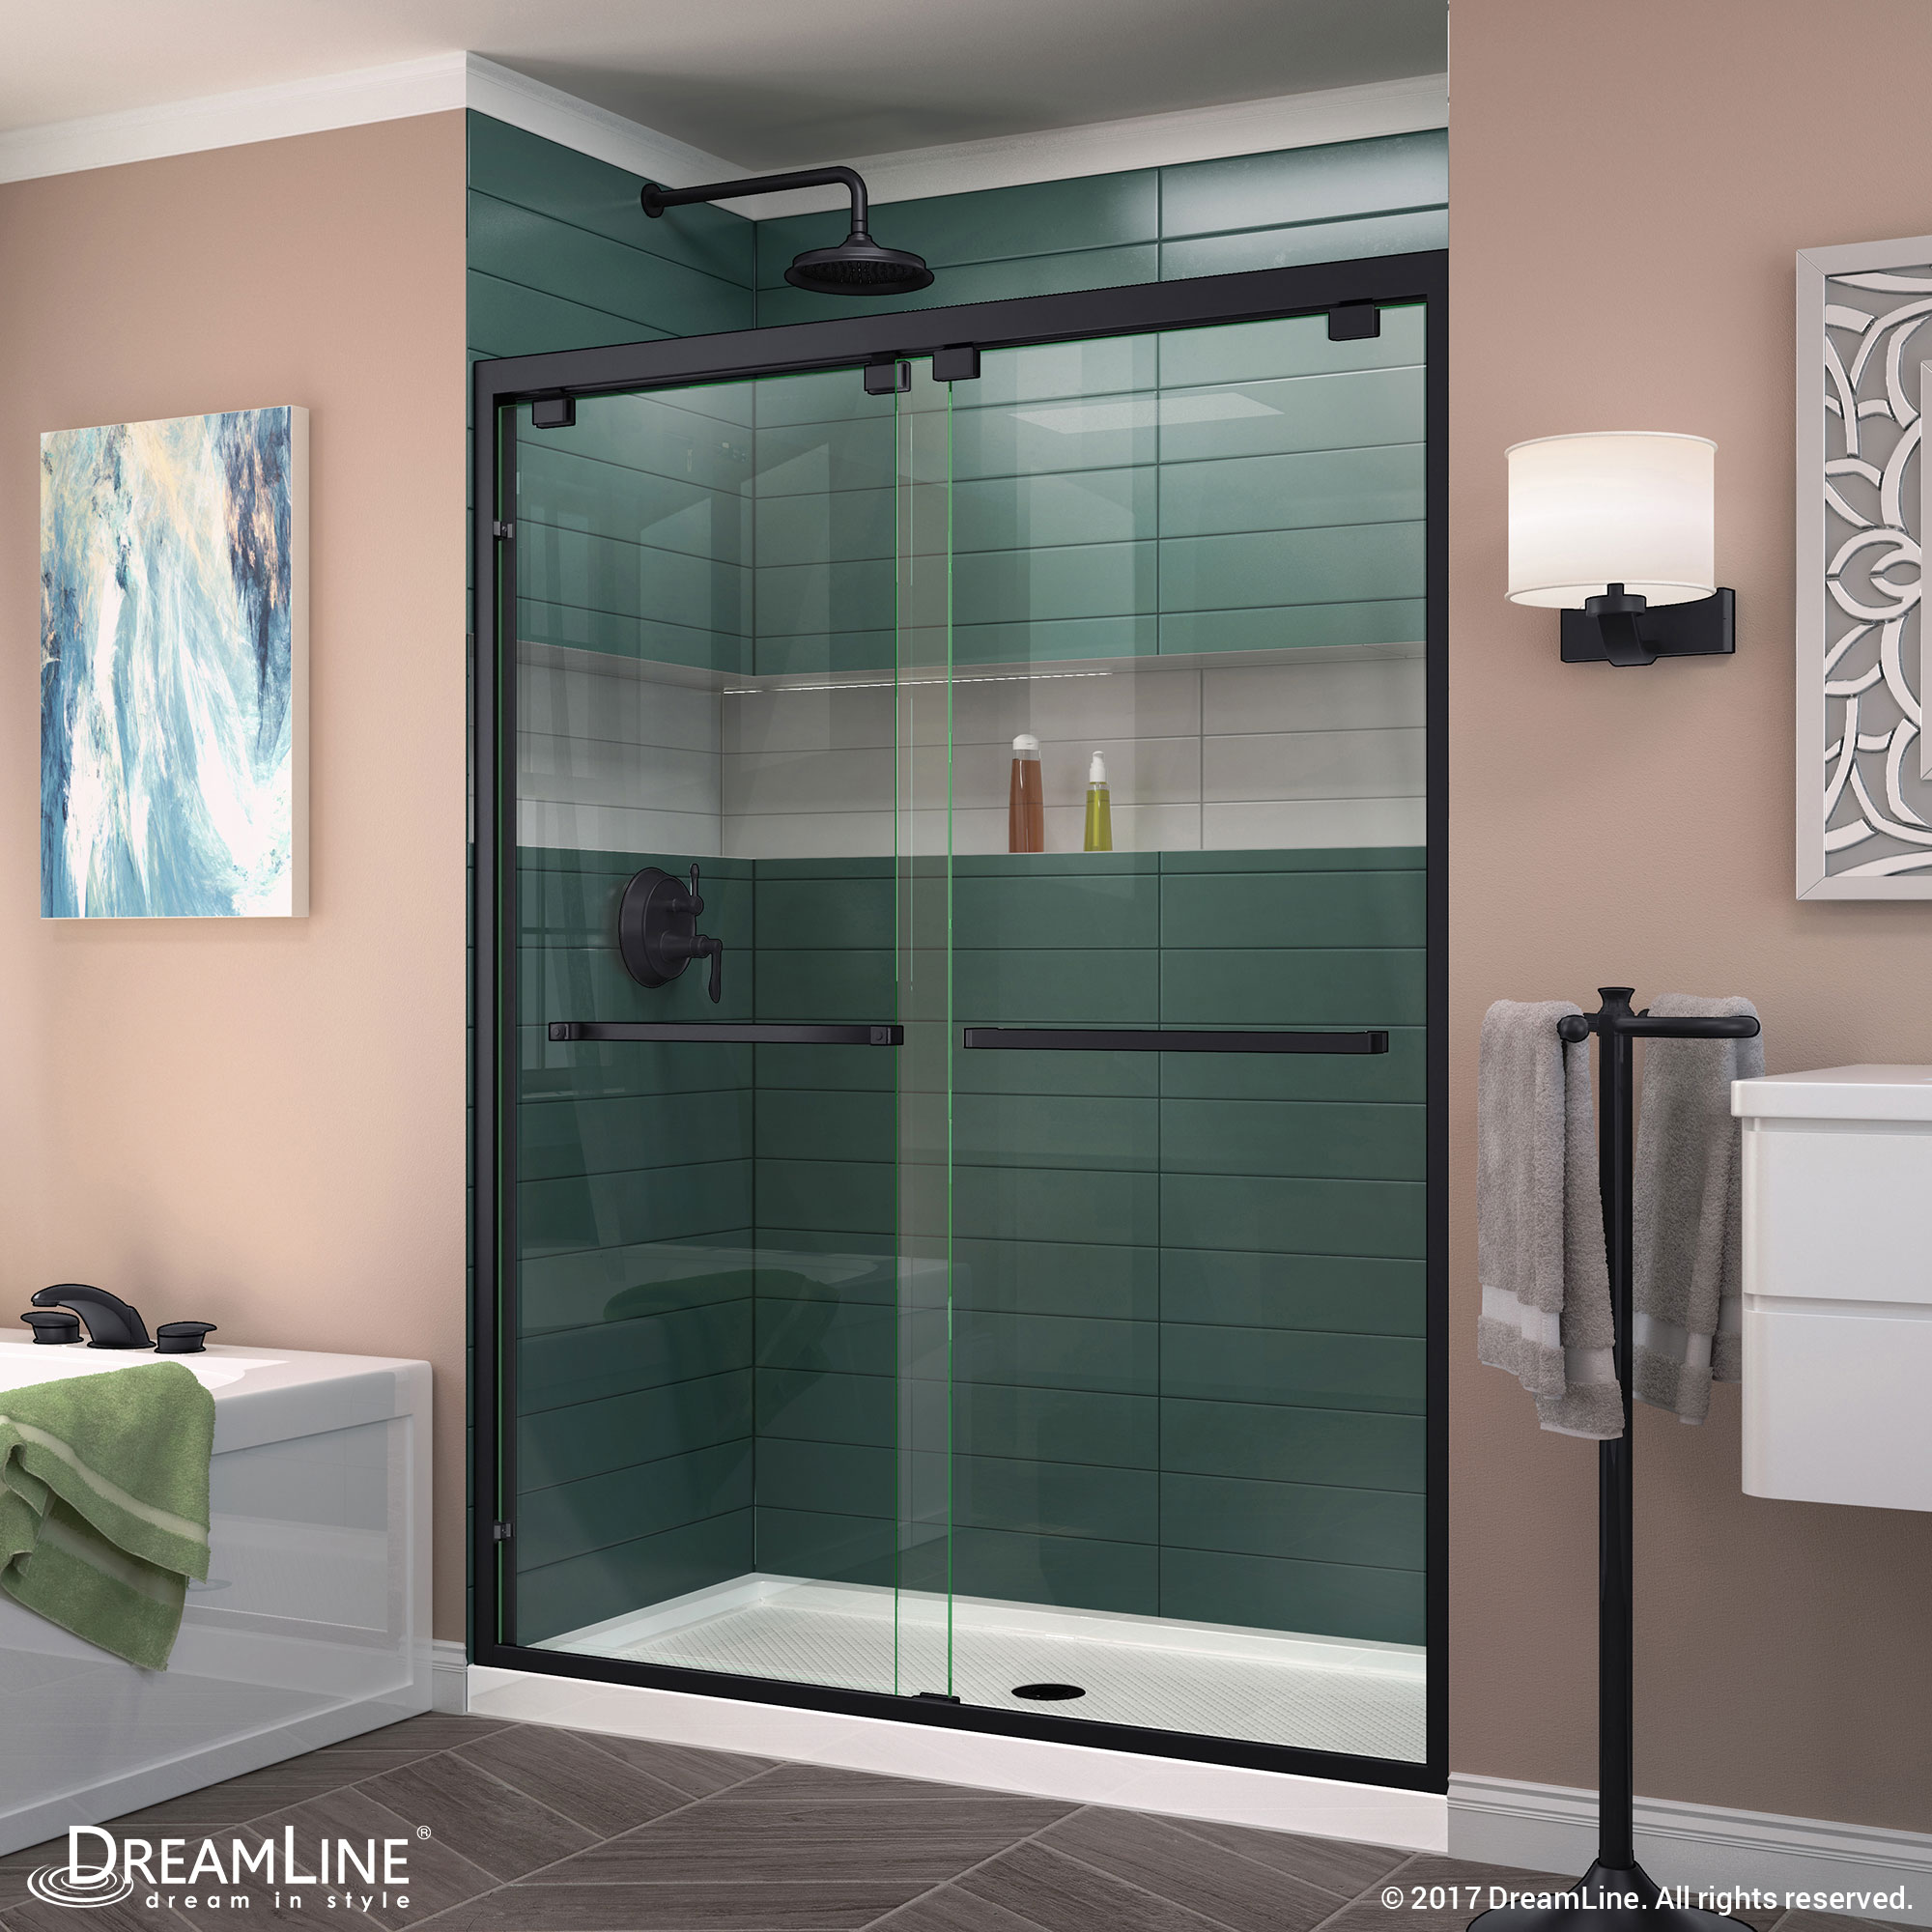 DreamLine Encore 30 in. D x 60 in. W x 78 3/4 in. H Bypass Shower Door in Brushed Nickel and Left Drain Biscuit Base Kit